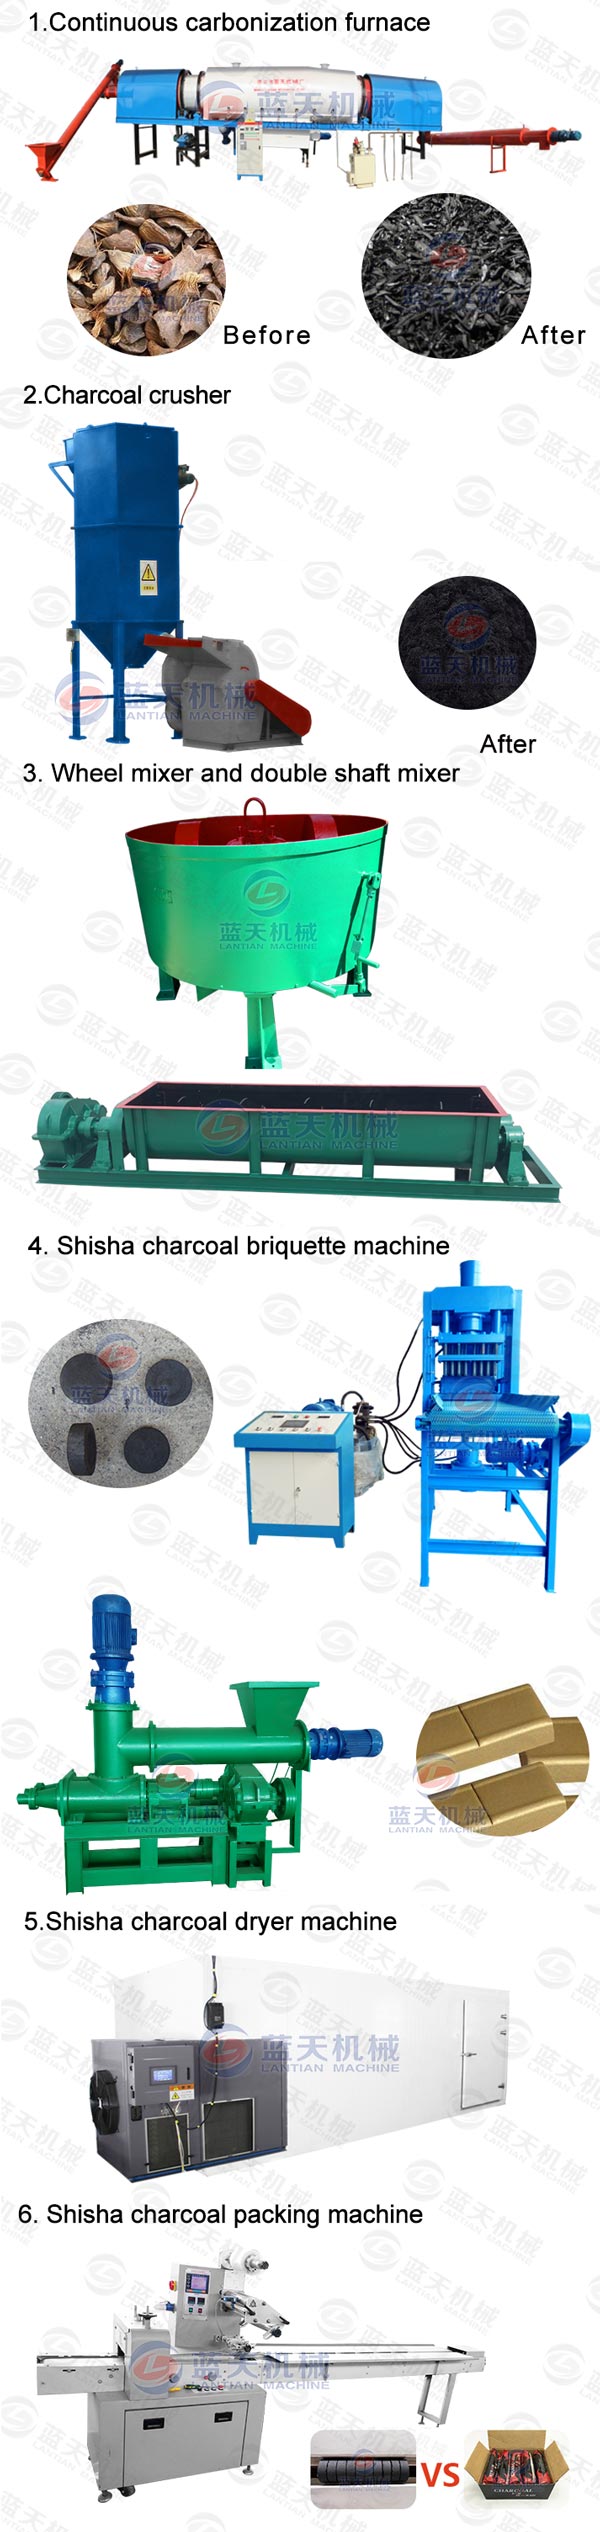 Product line of wood charcoal carbonization furnace